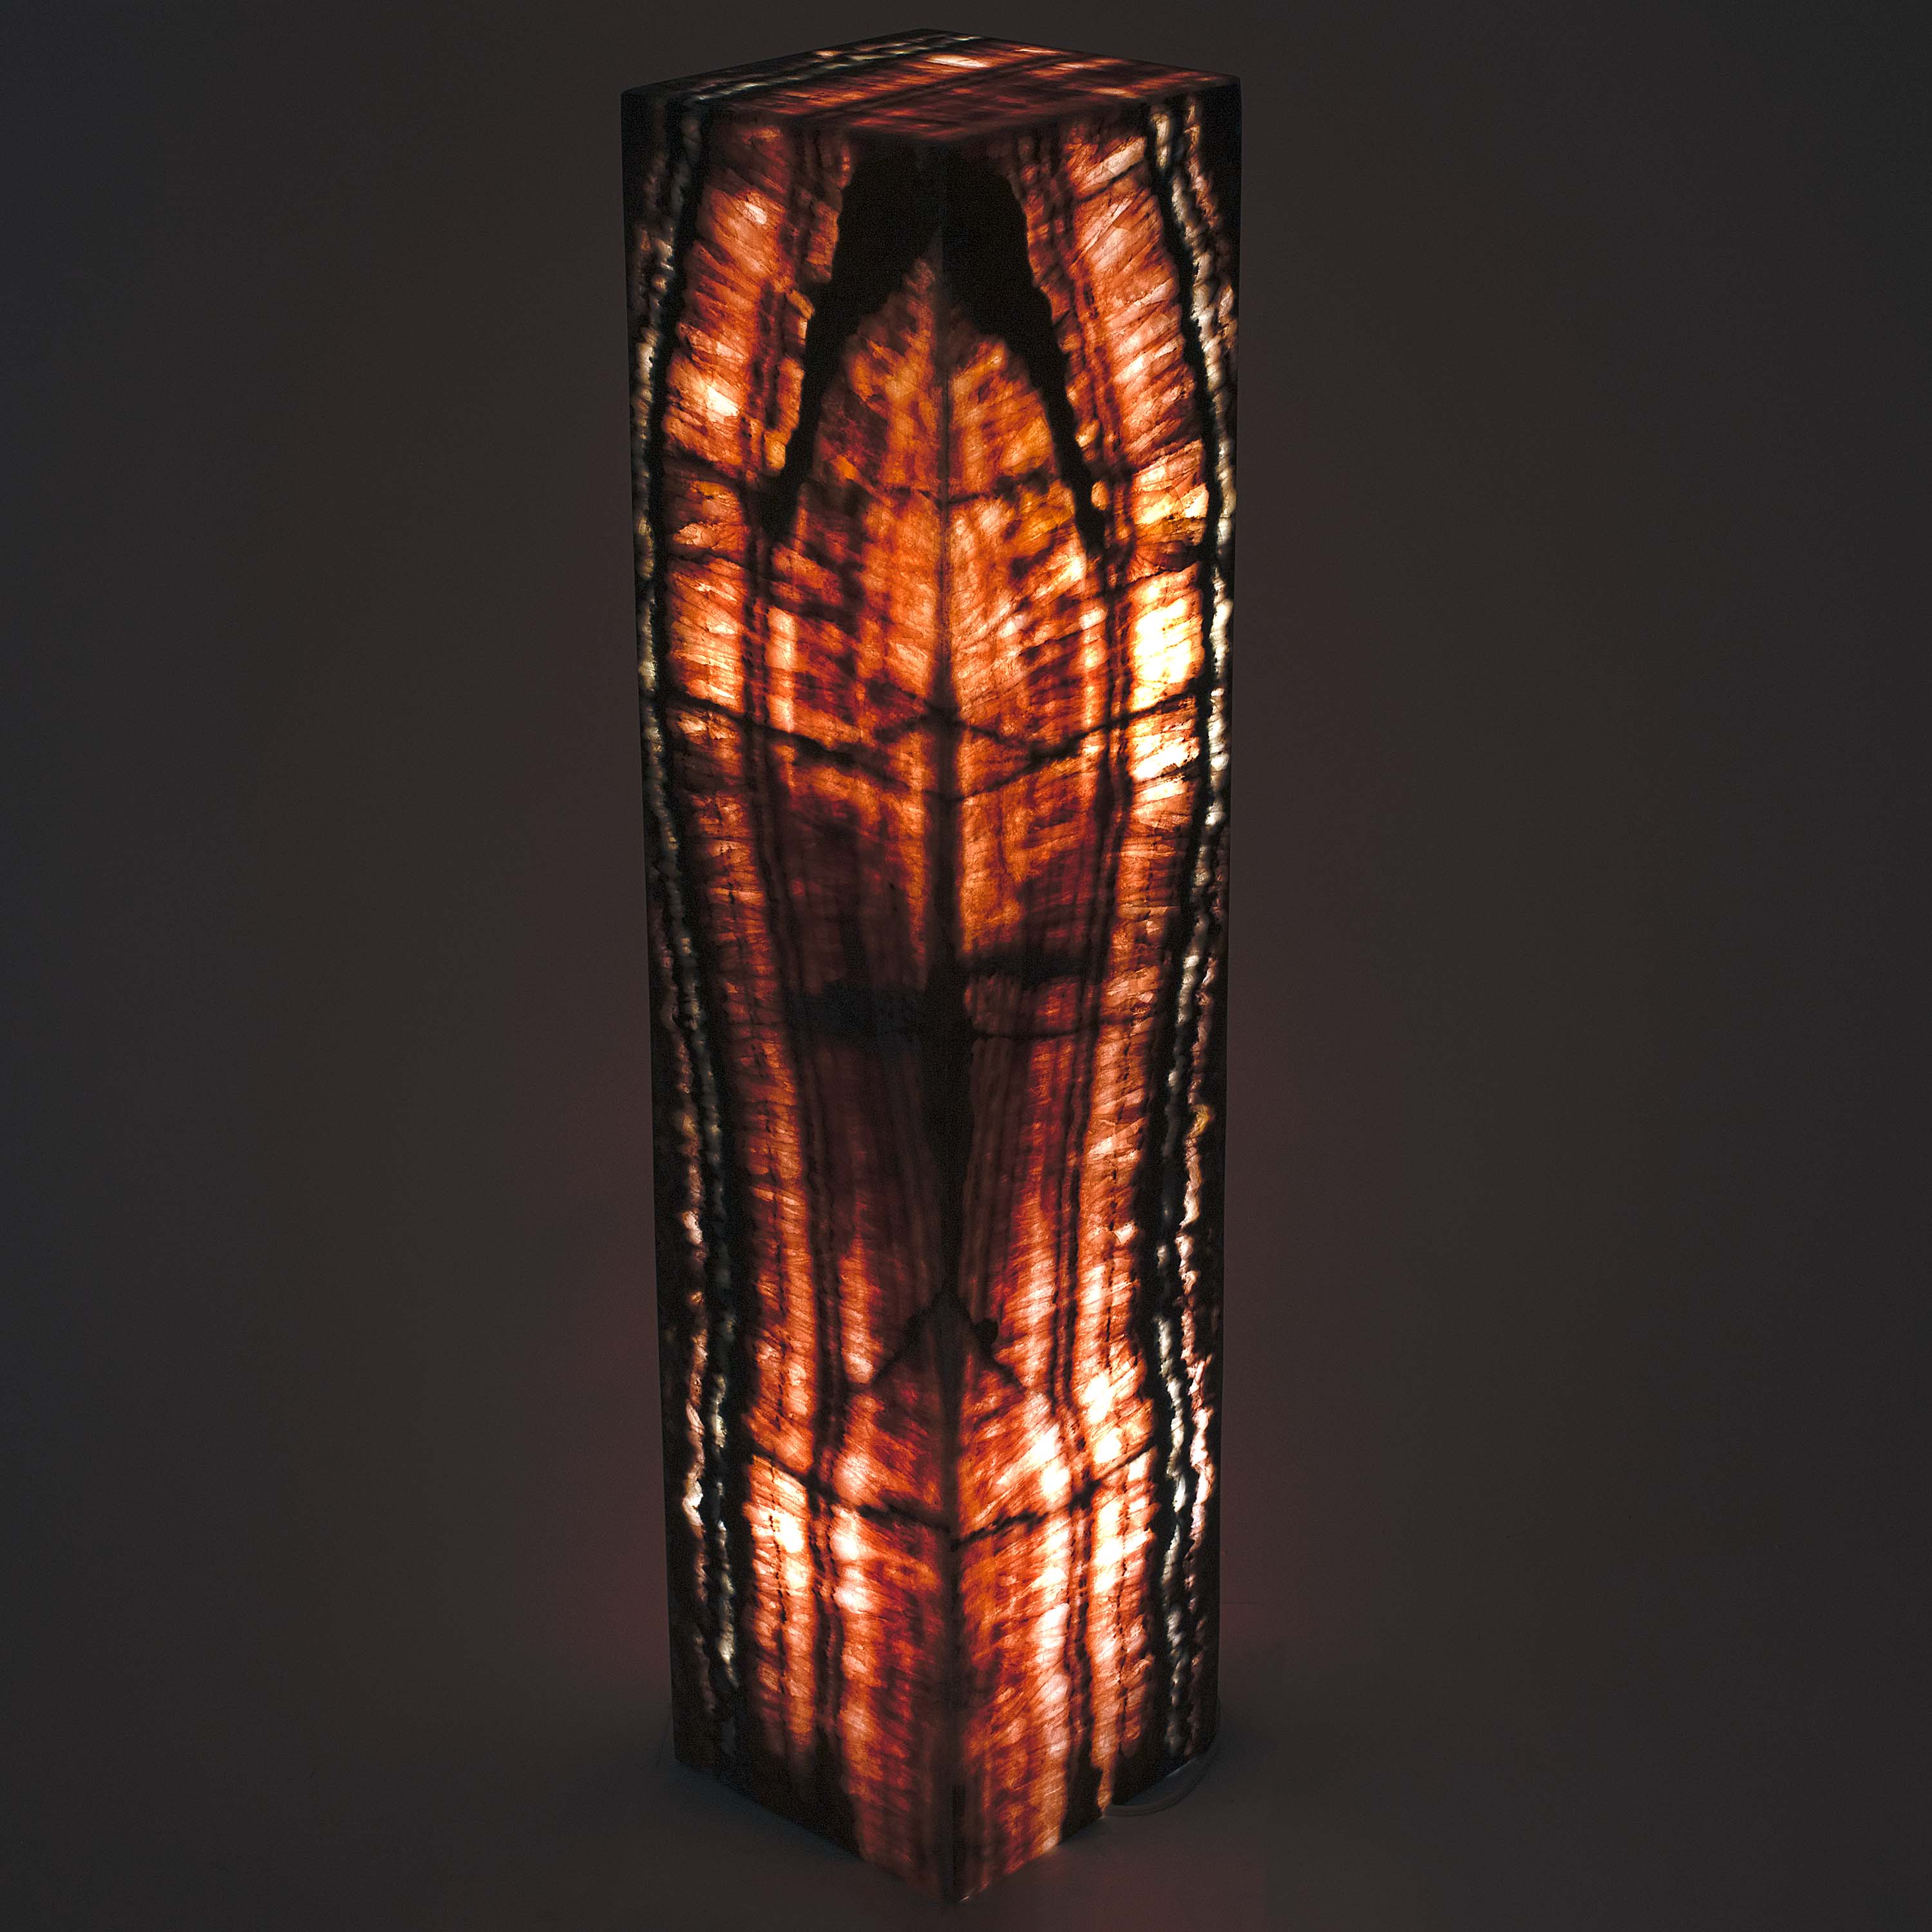 Kalifano Light Towers Natural Pink Onyx Lamp Light Tower from Mexico - 40" tall LT10023-PK.001